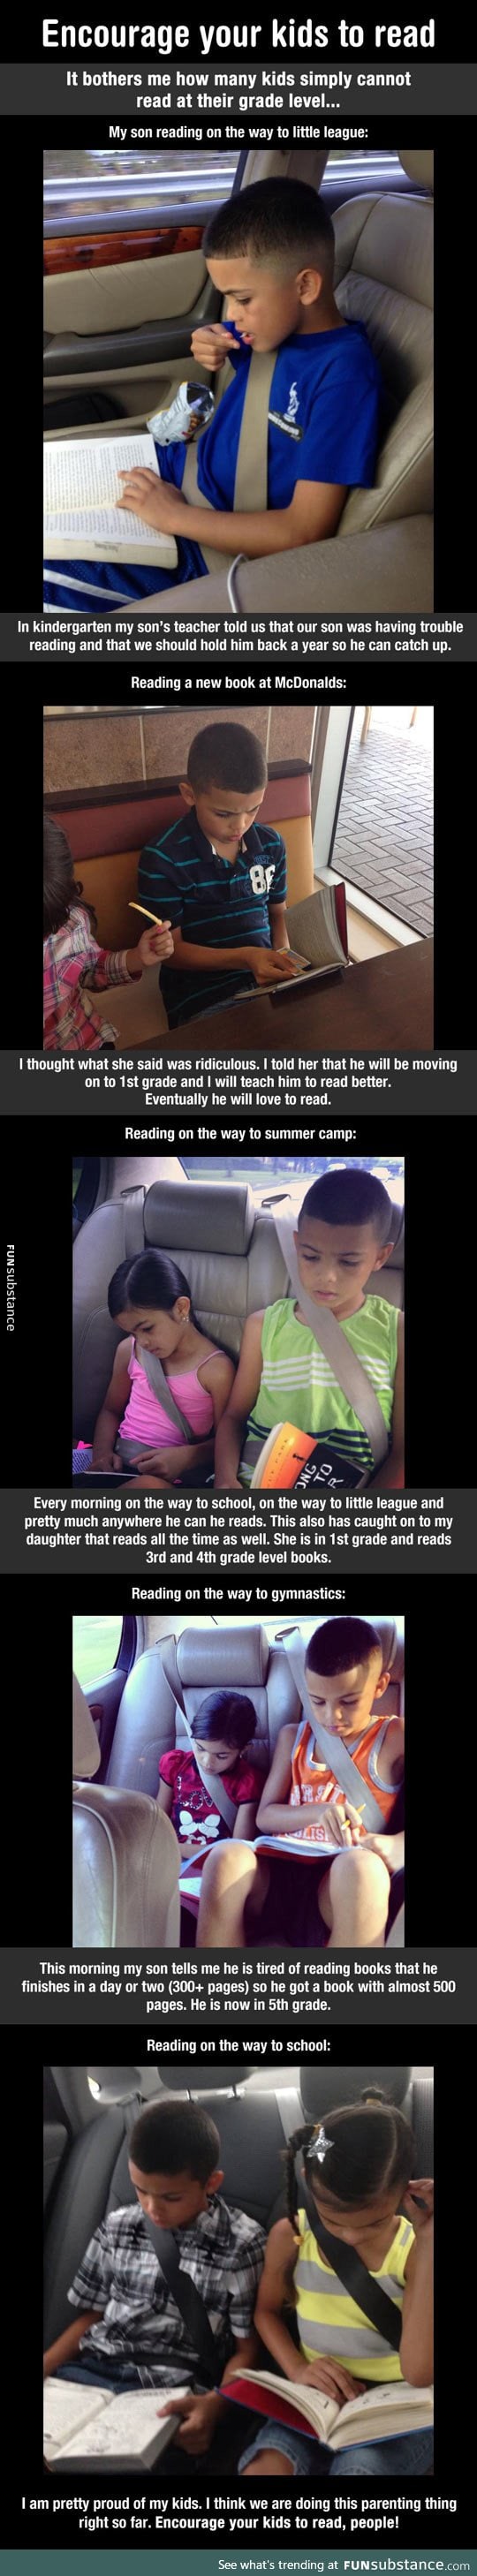 Why you should encourage your kids to read